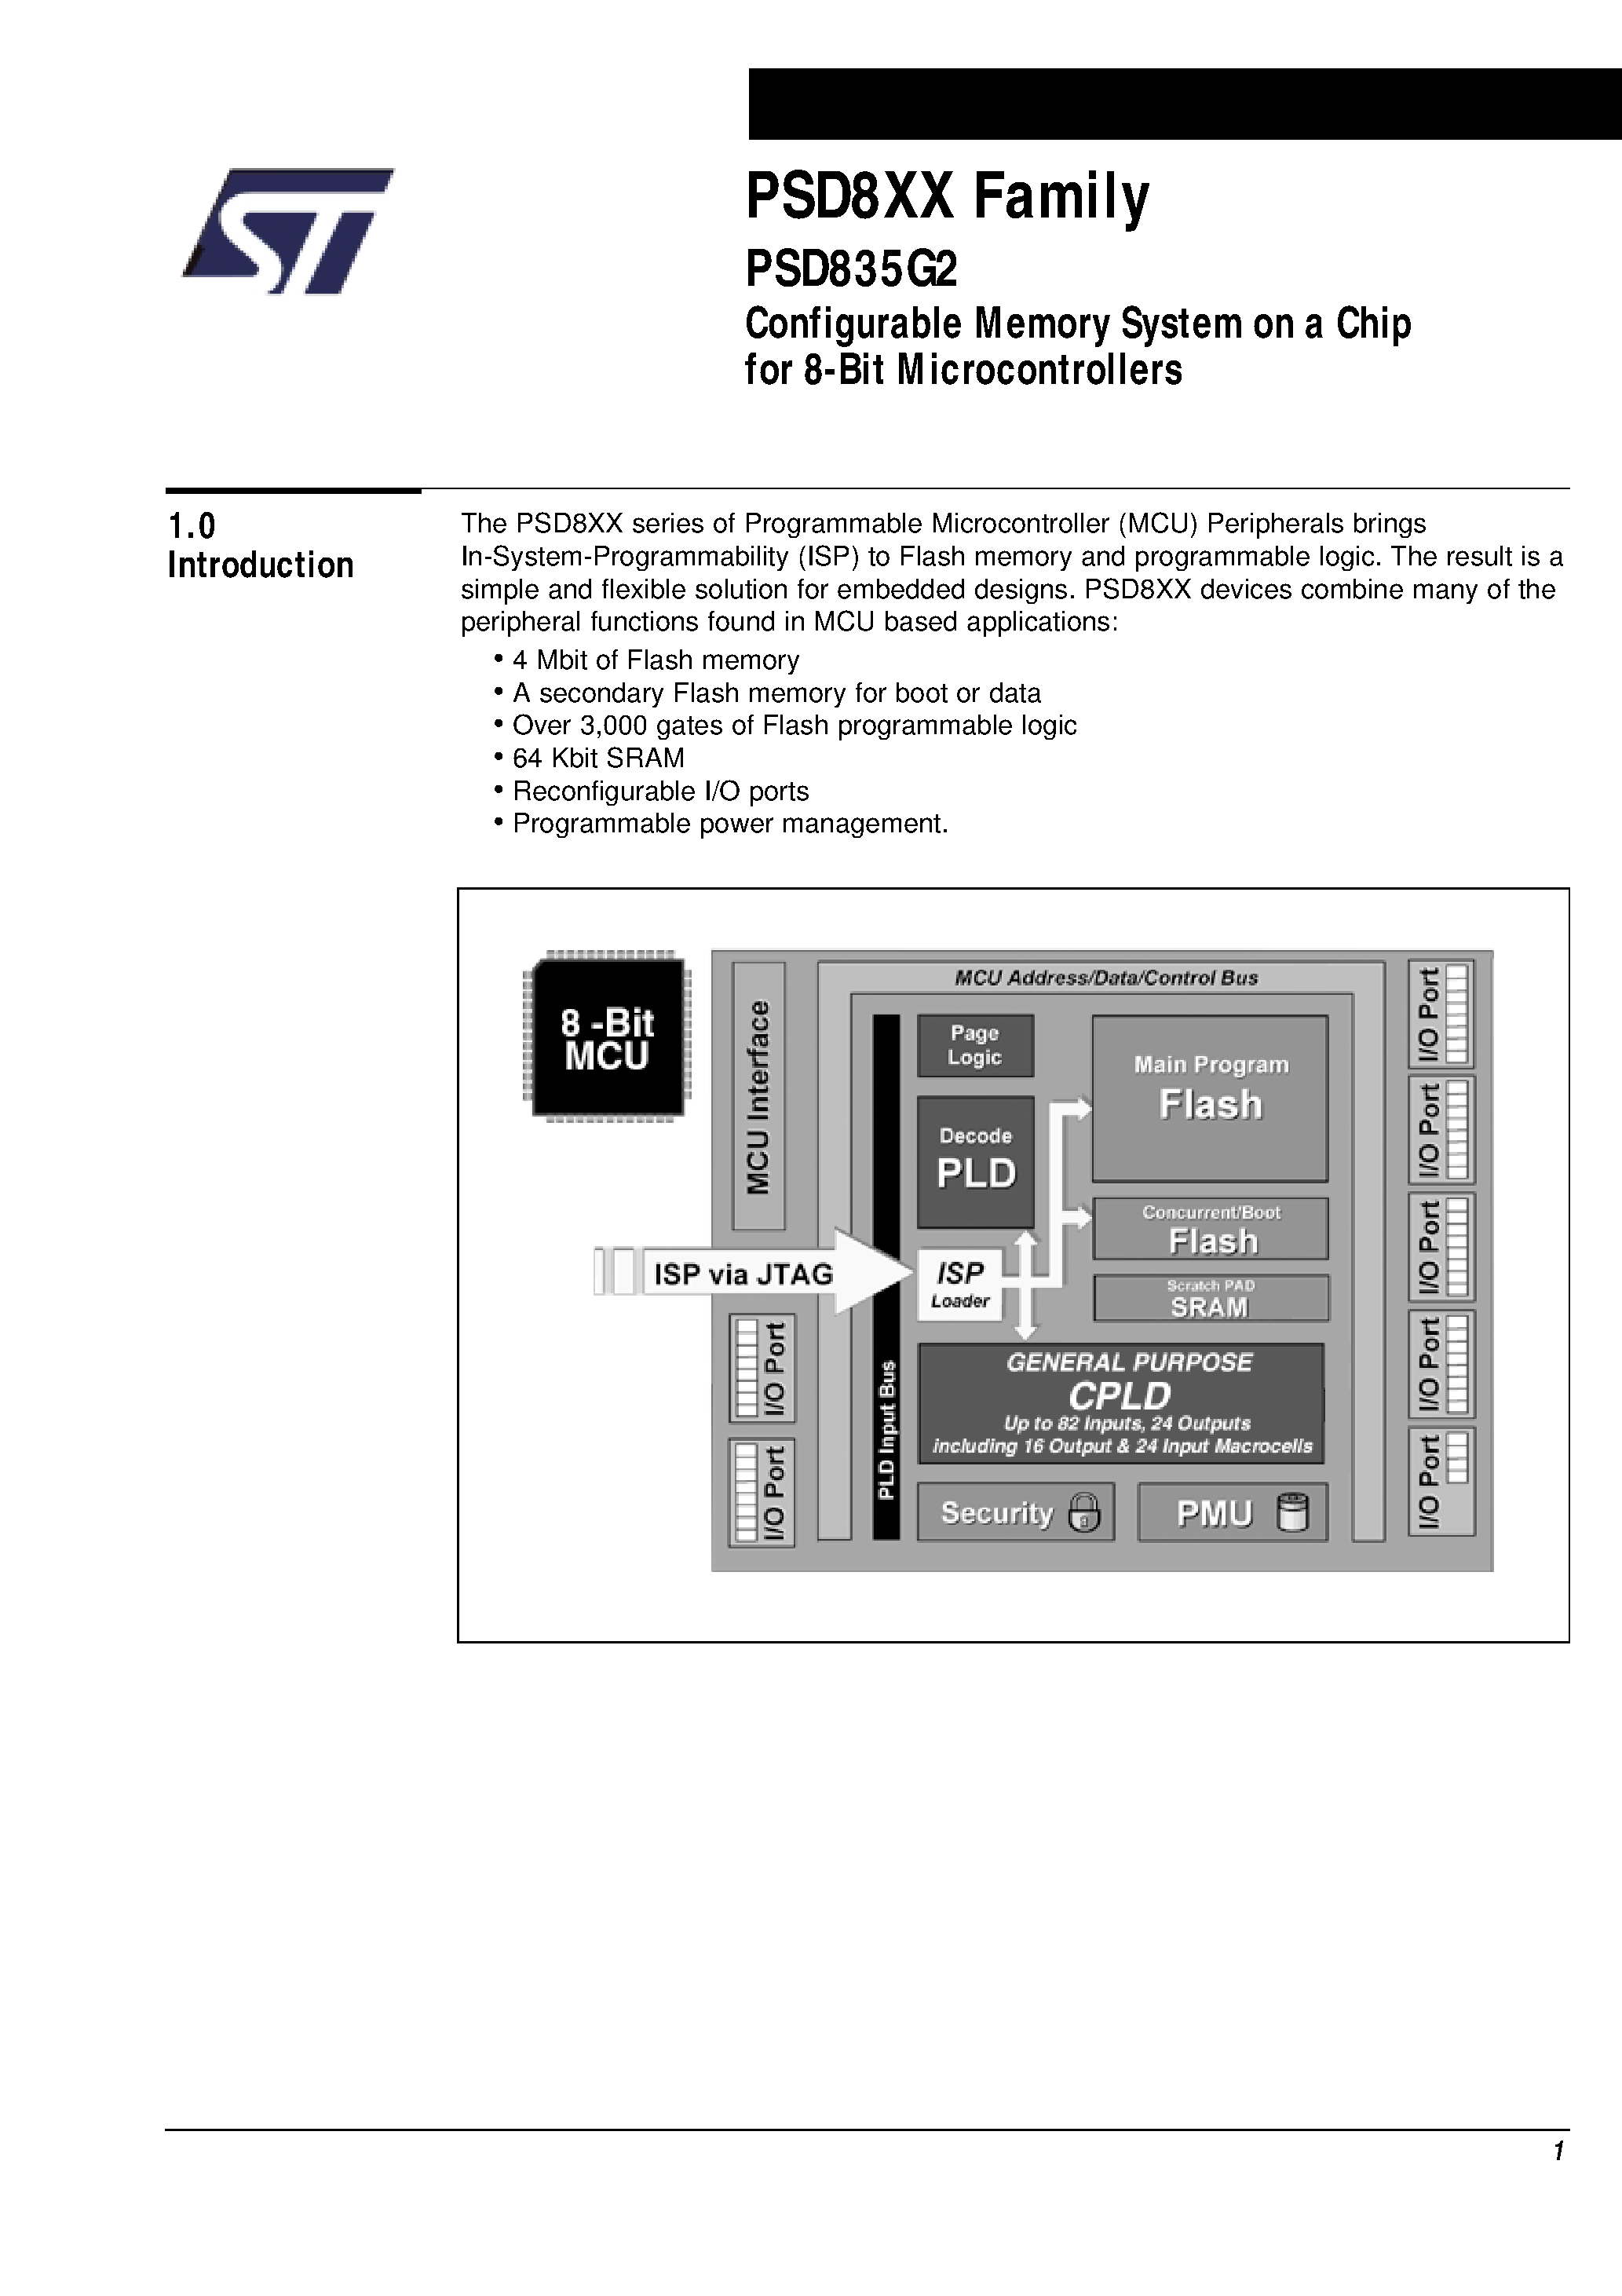 Datasheet PSD835F2-A-70U - Configurable Memory System on a Chip for 8-Bit Microcontrollers page 2